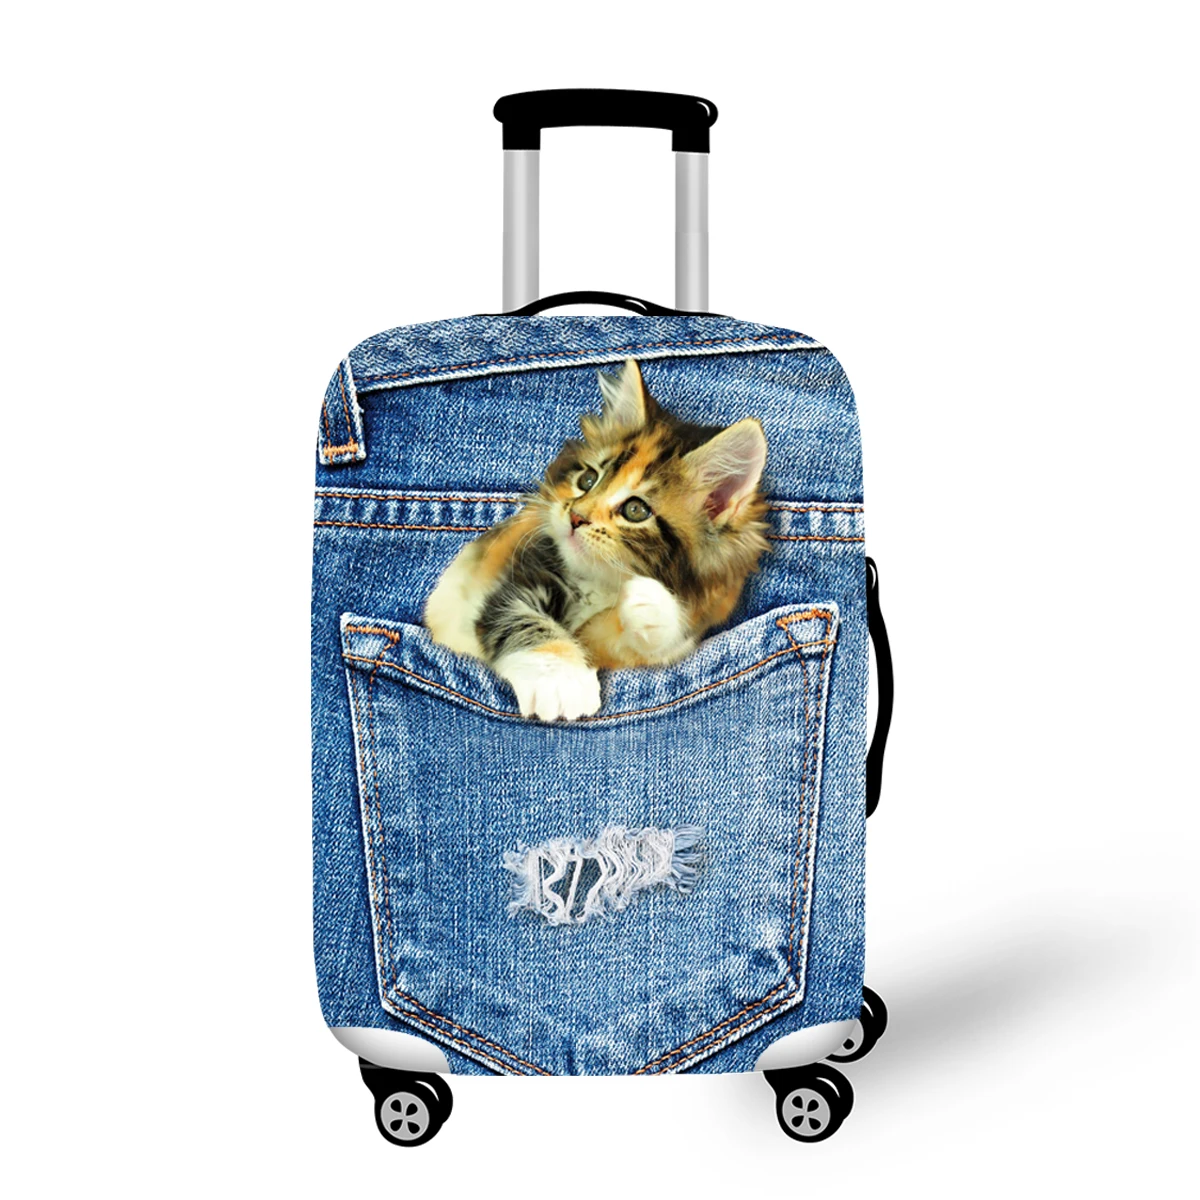 

Capa de bagagem cute cat design print luggage cover for kids spandex luggage protector covers with zipper, Full printing color